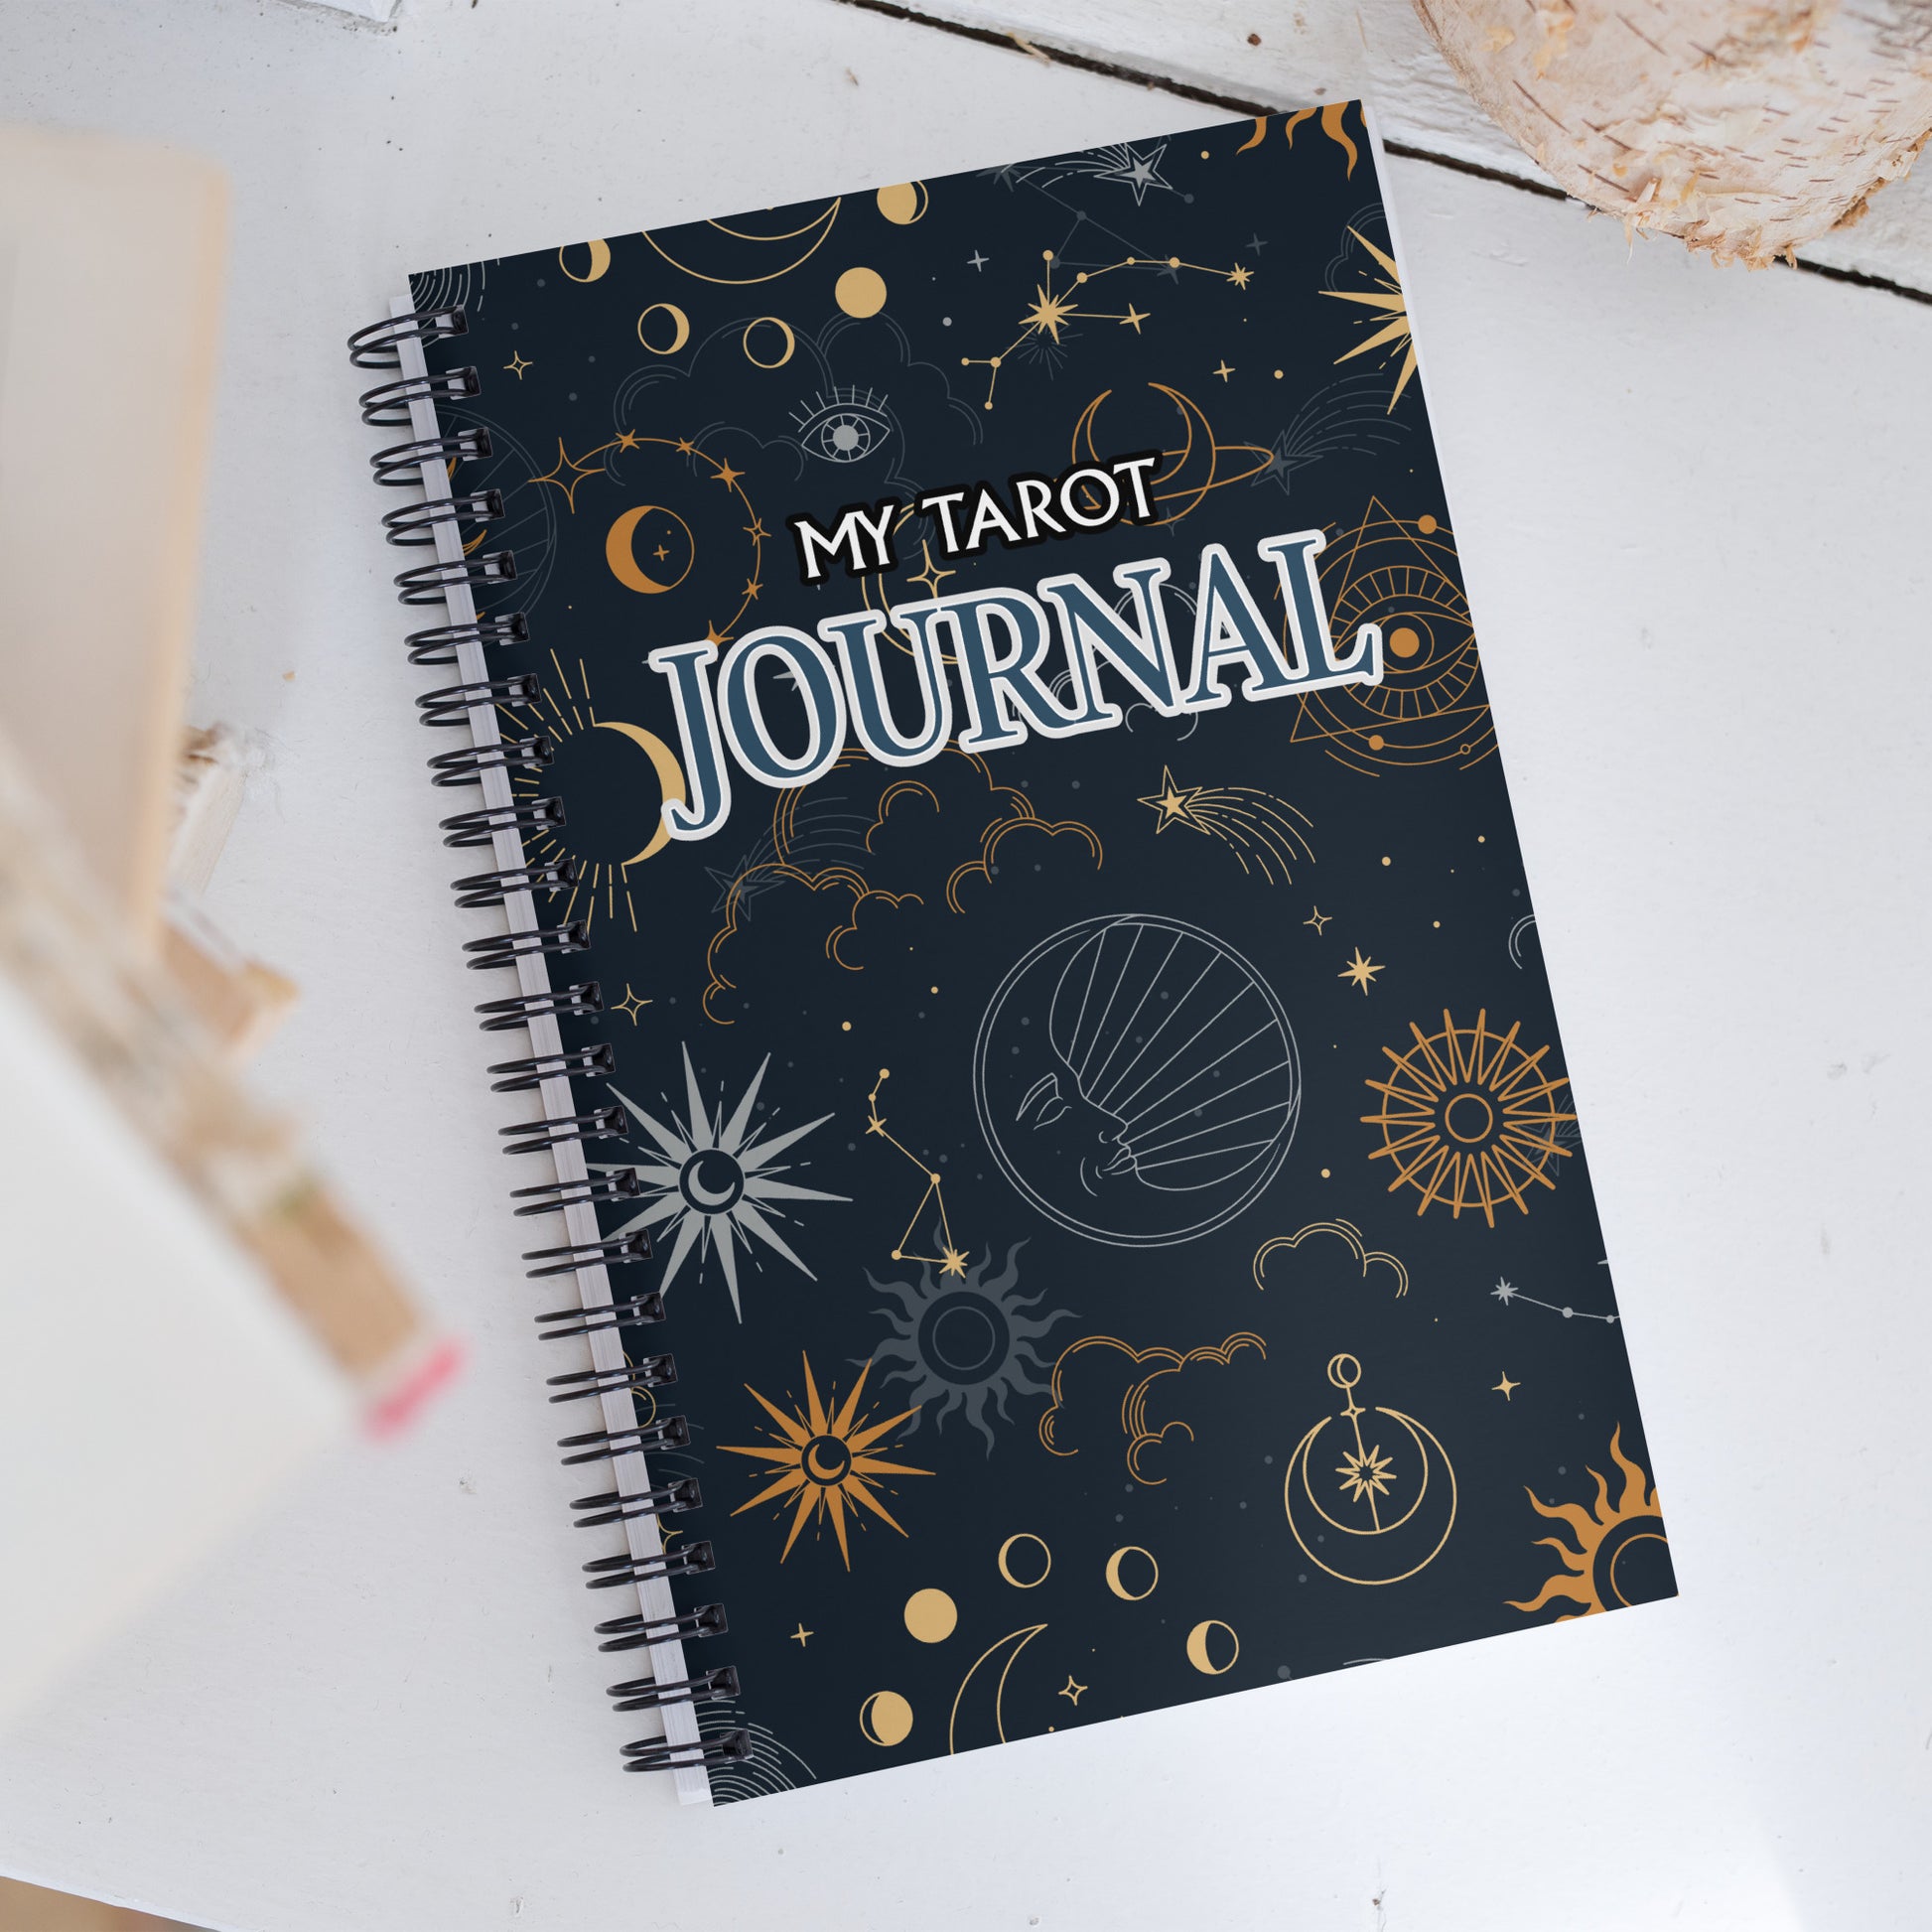 My Tarot Journal Spiral Dotted Notebook – The INNERVISION Shop